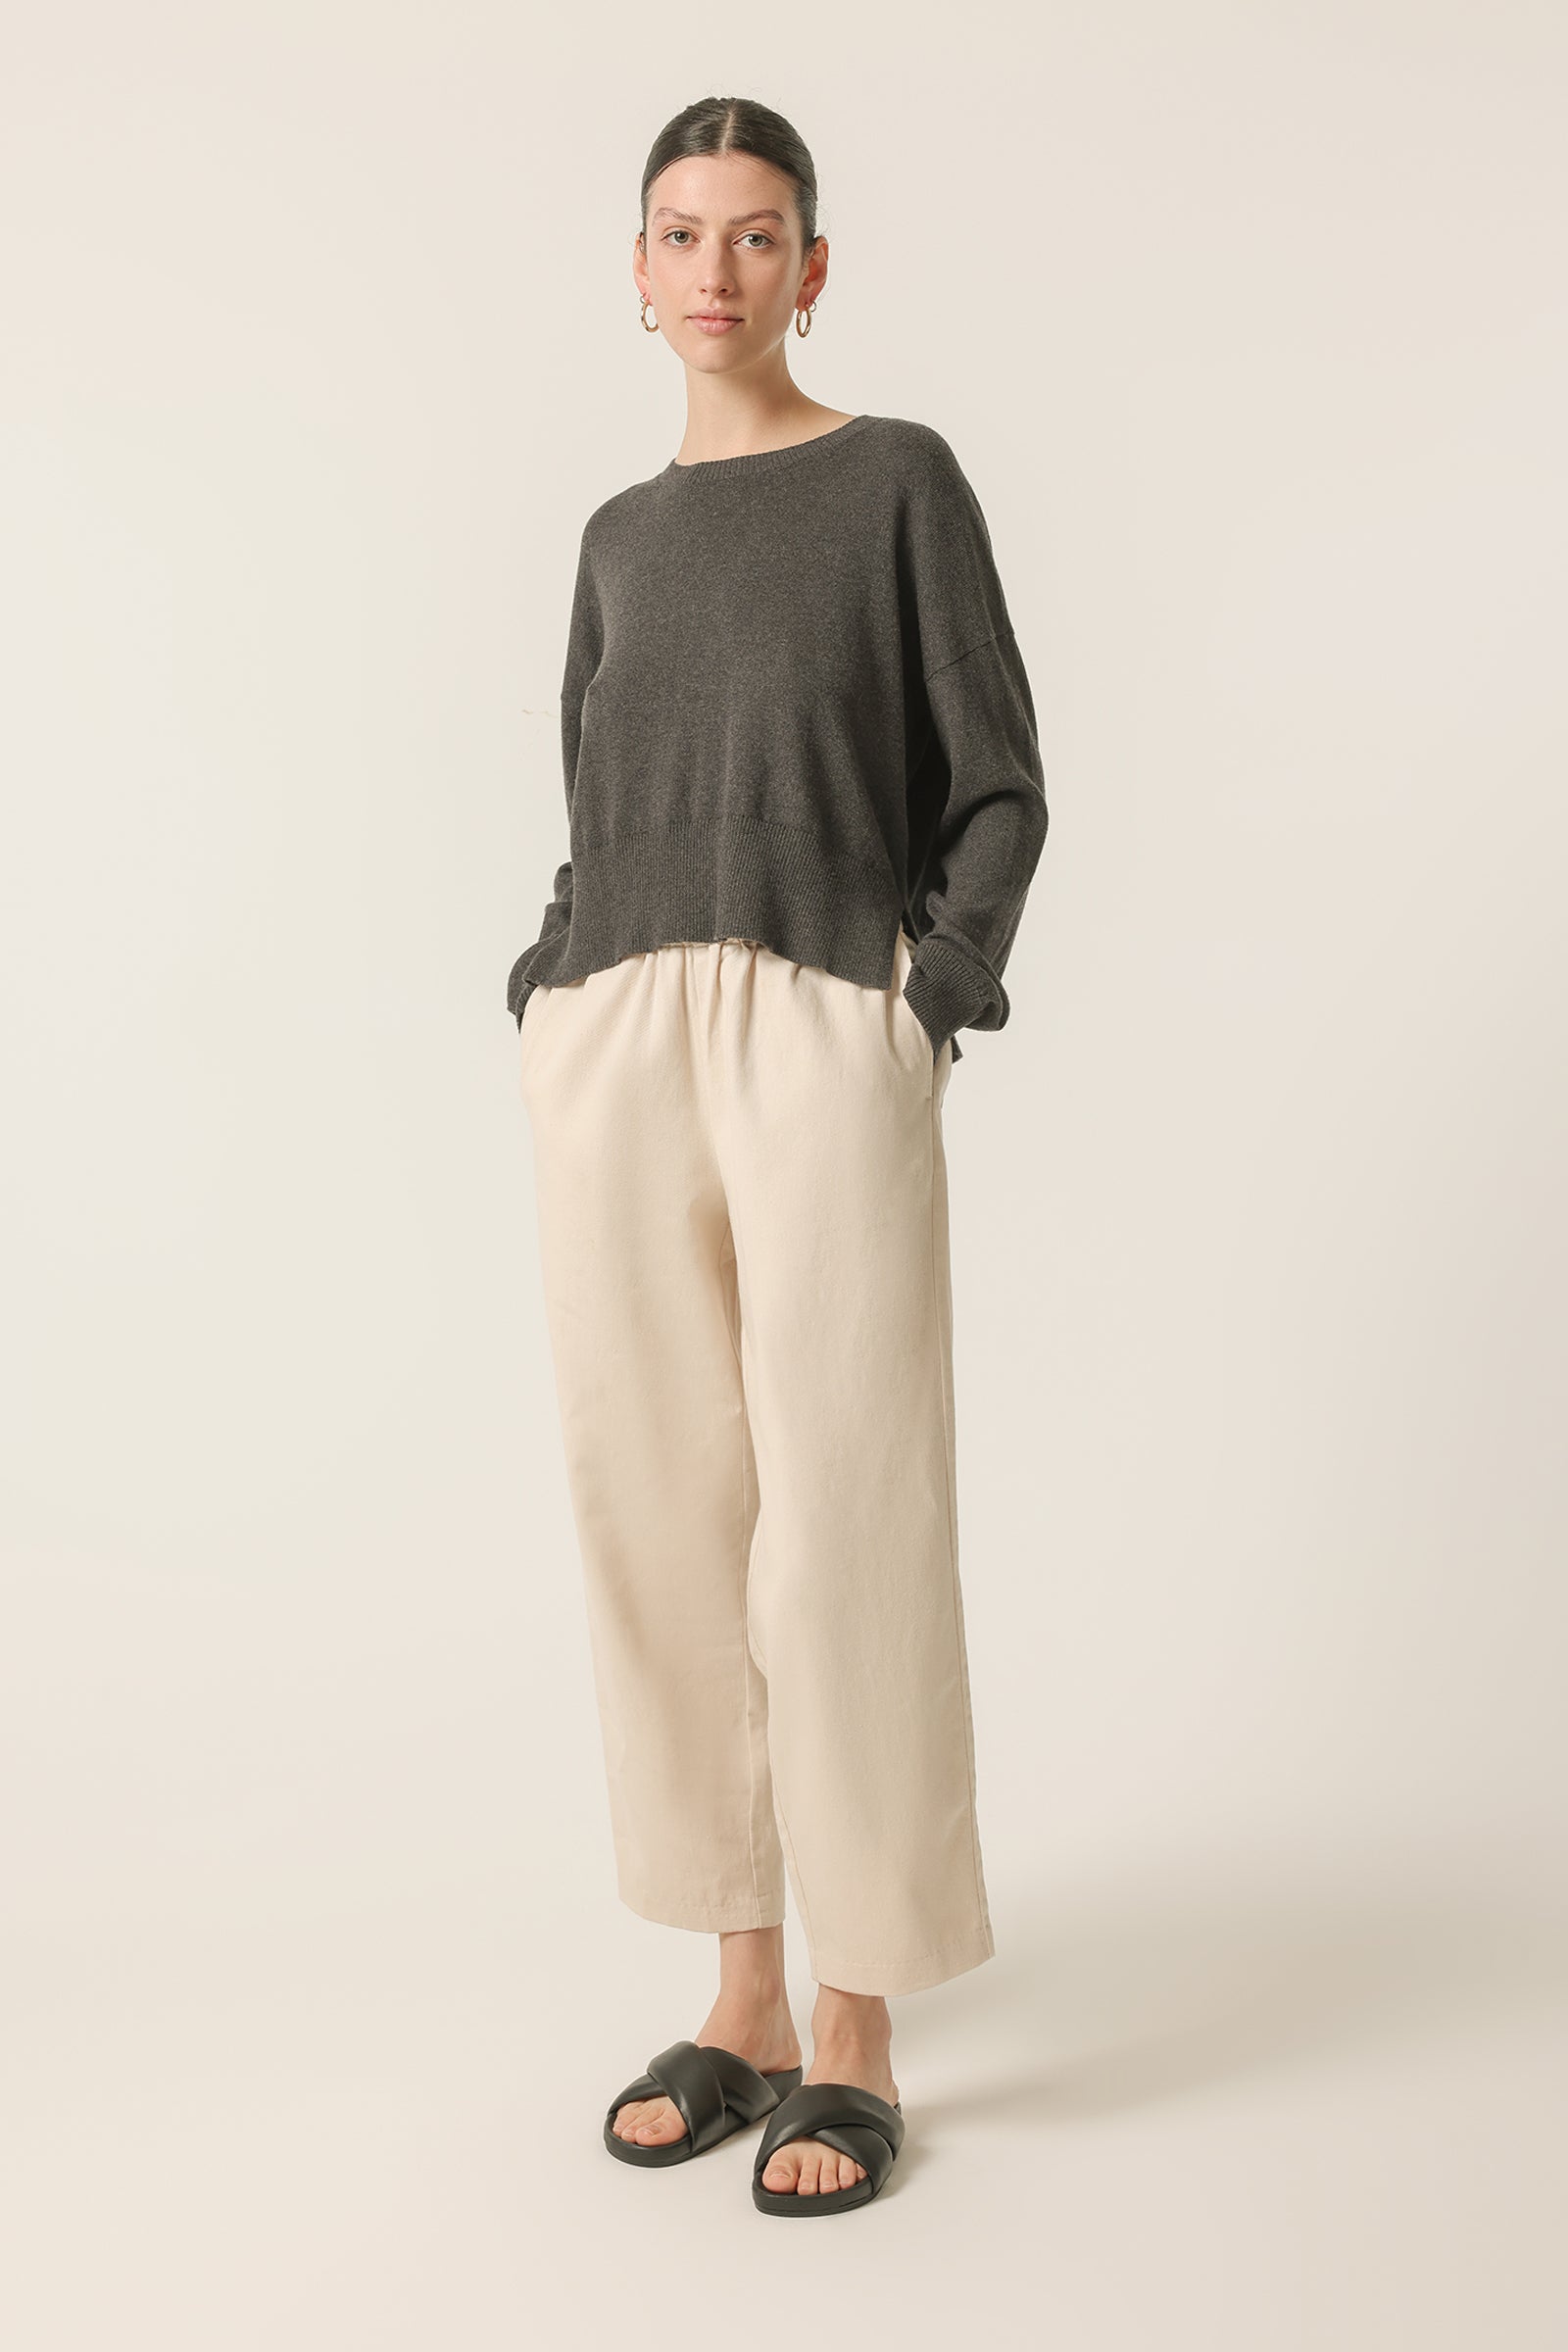 Nude Lucy Taryn Knit In Charin A Brown Coal Colour 